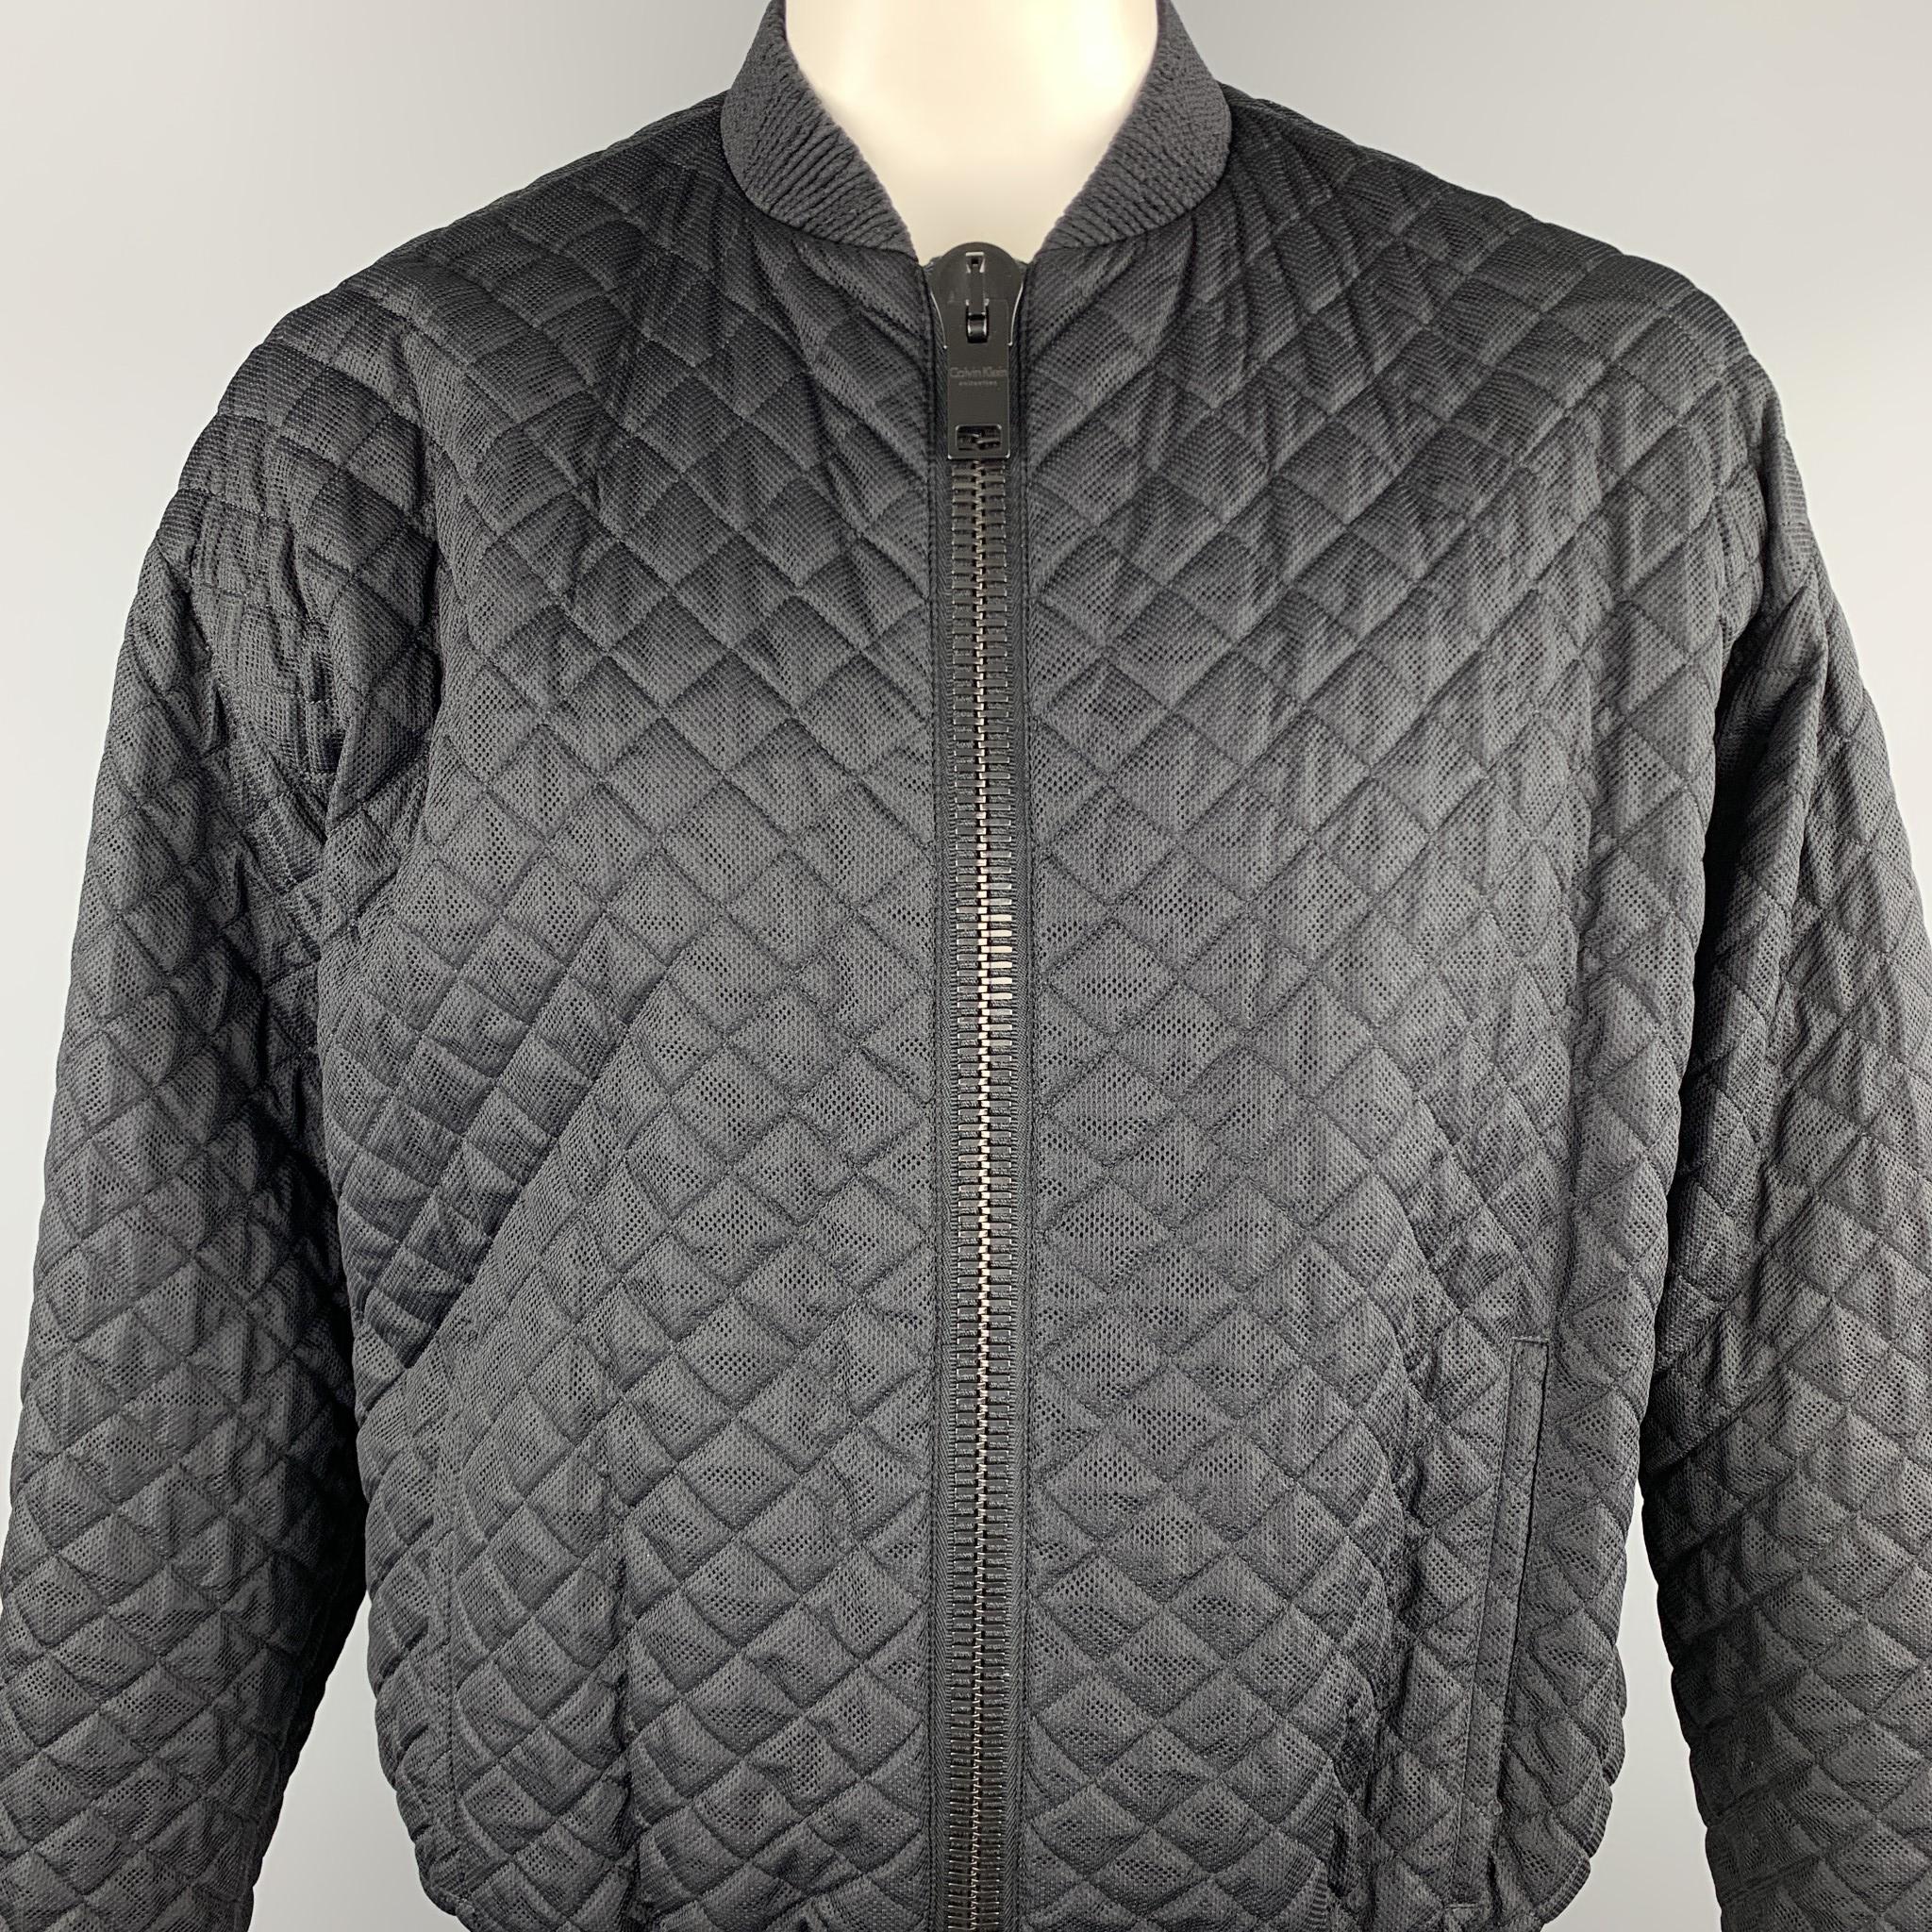 CALVIN KLEIN COLLECTION jacket comes in a black quilted nylon featuring a bomber style and a chunky zipper closure. Made in Italy.

Excellent Pre-Owned Condition.
Marked: IT 52

Measurements:

Shoulder: 23 in. 
Chest: 50 in. 
Sleeve: 25 in. 
Length: